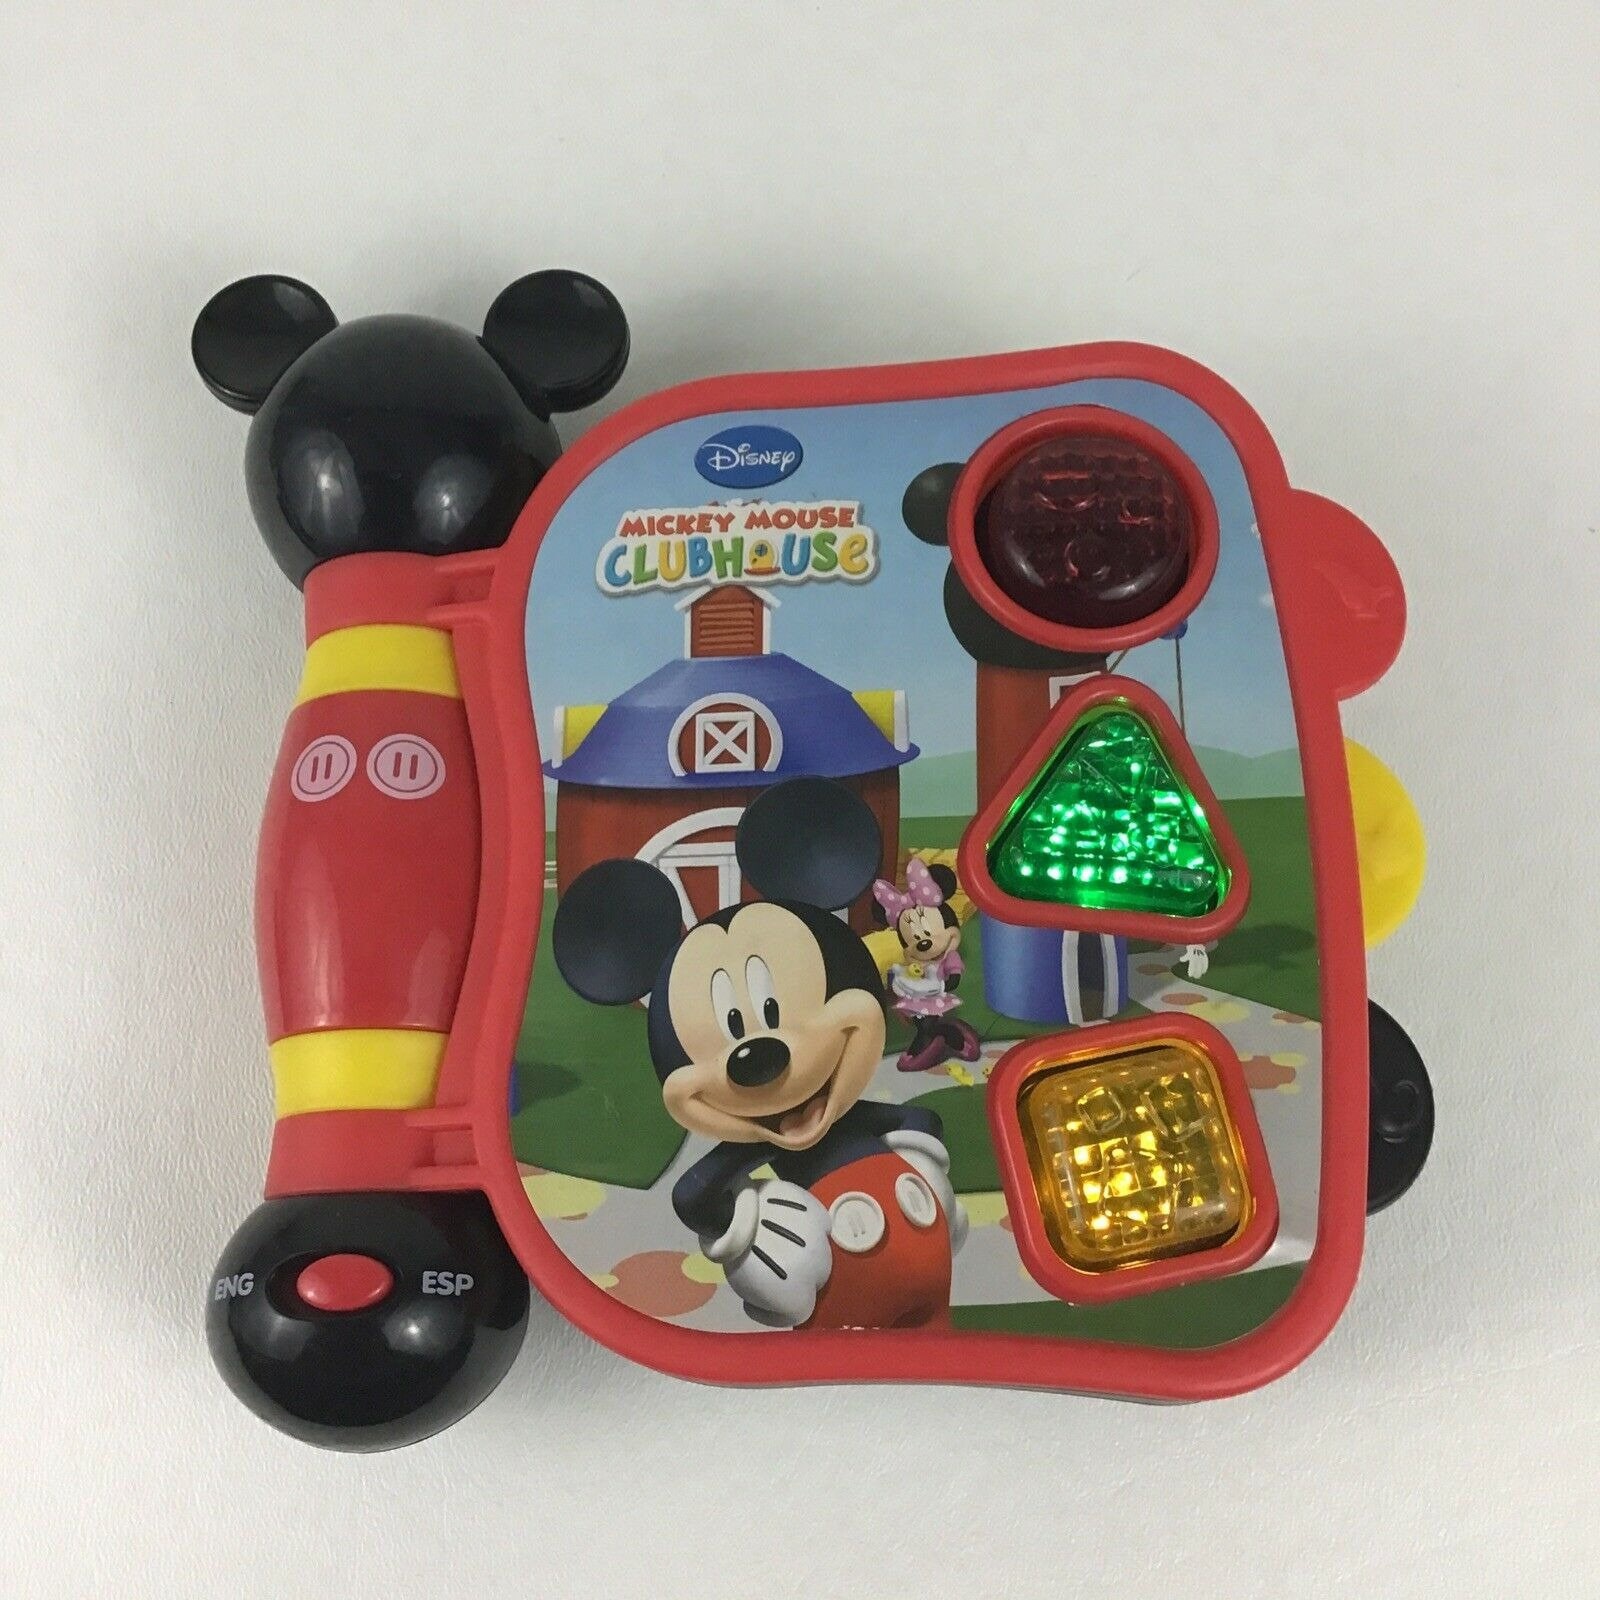 genoeg schaduw Stadion Disney Mickey Mouse Clubhouse Baby Learning Counting Book - Etsy Nederland